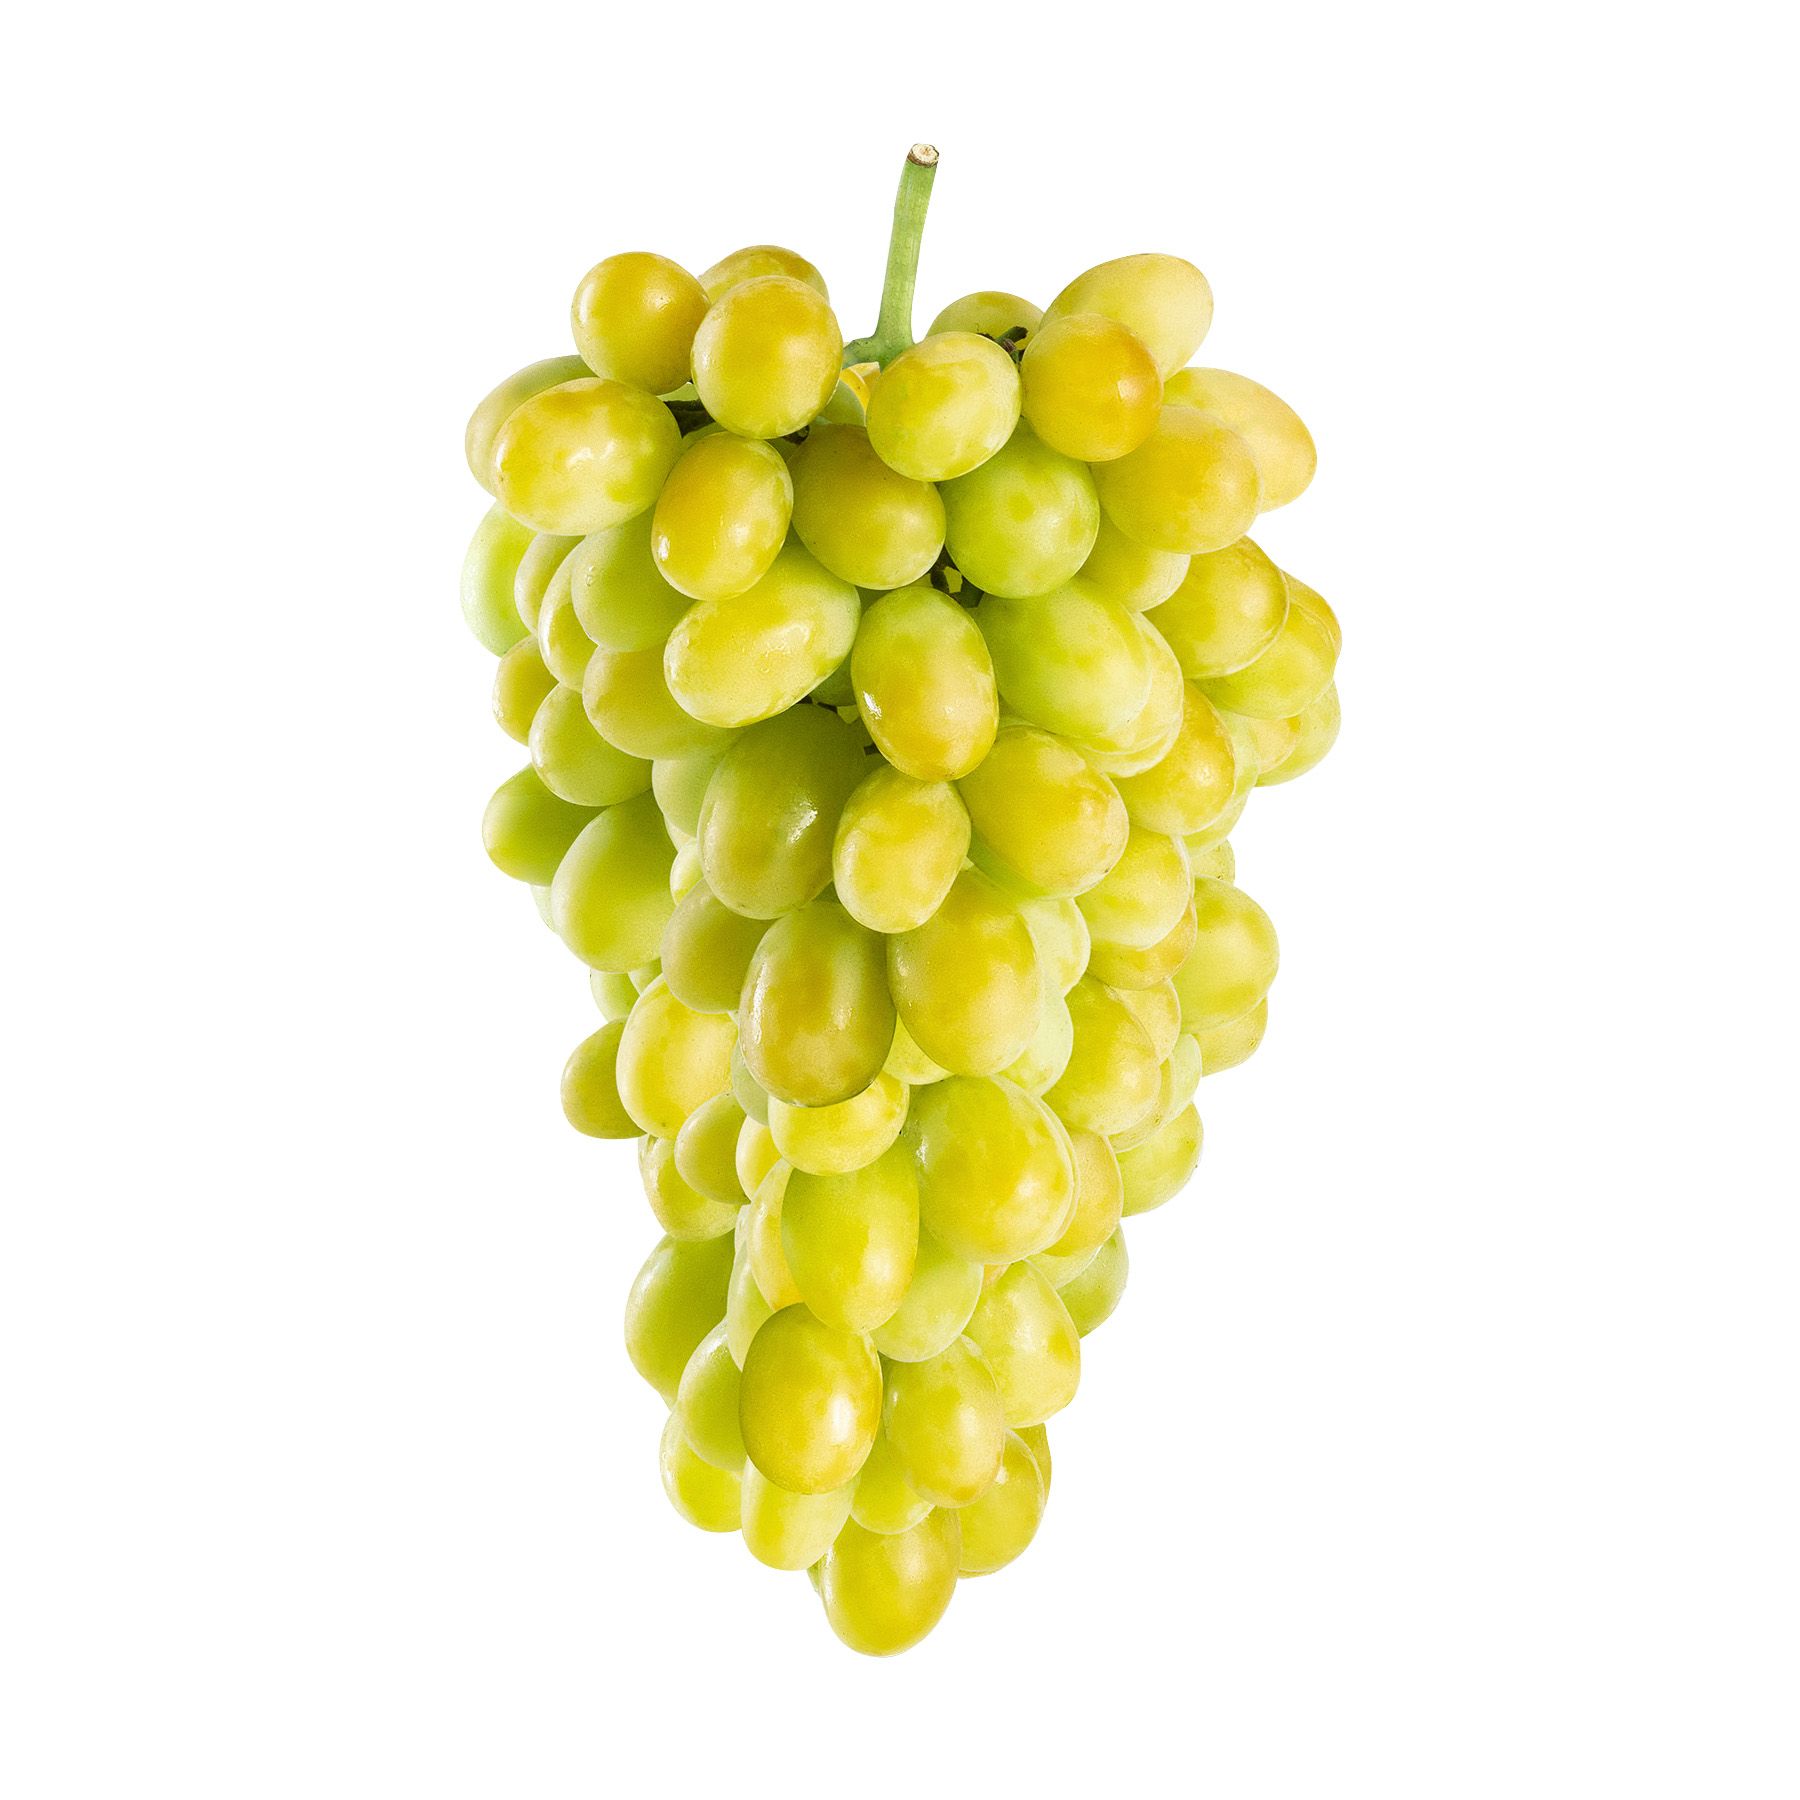 Cotton Candy Grapes, 2 lbs.